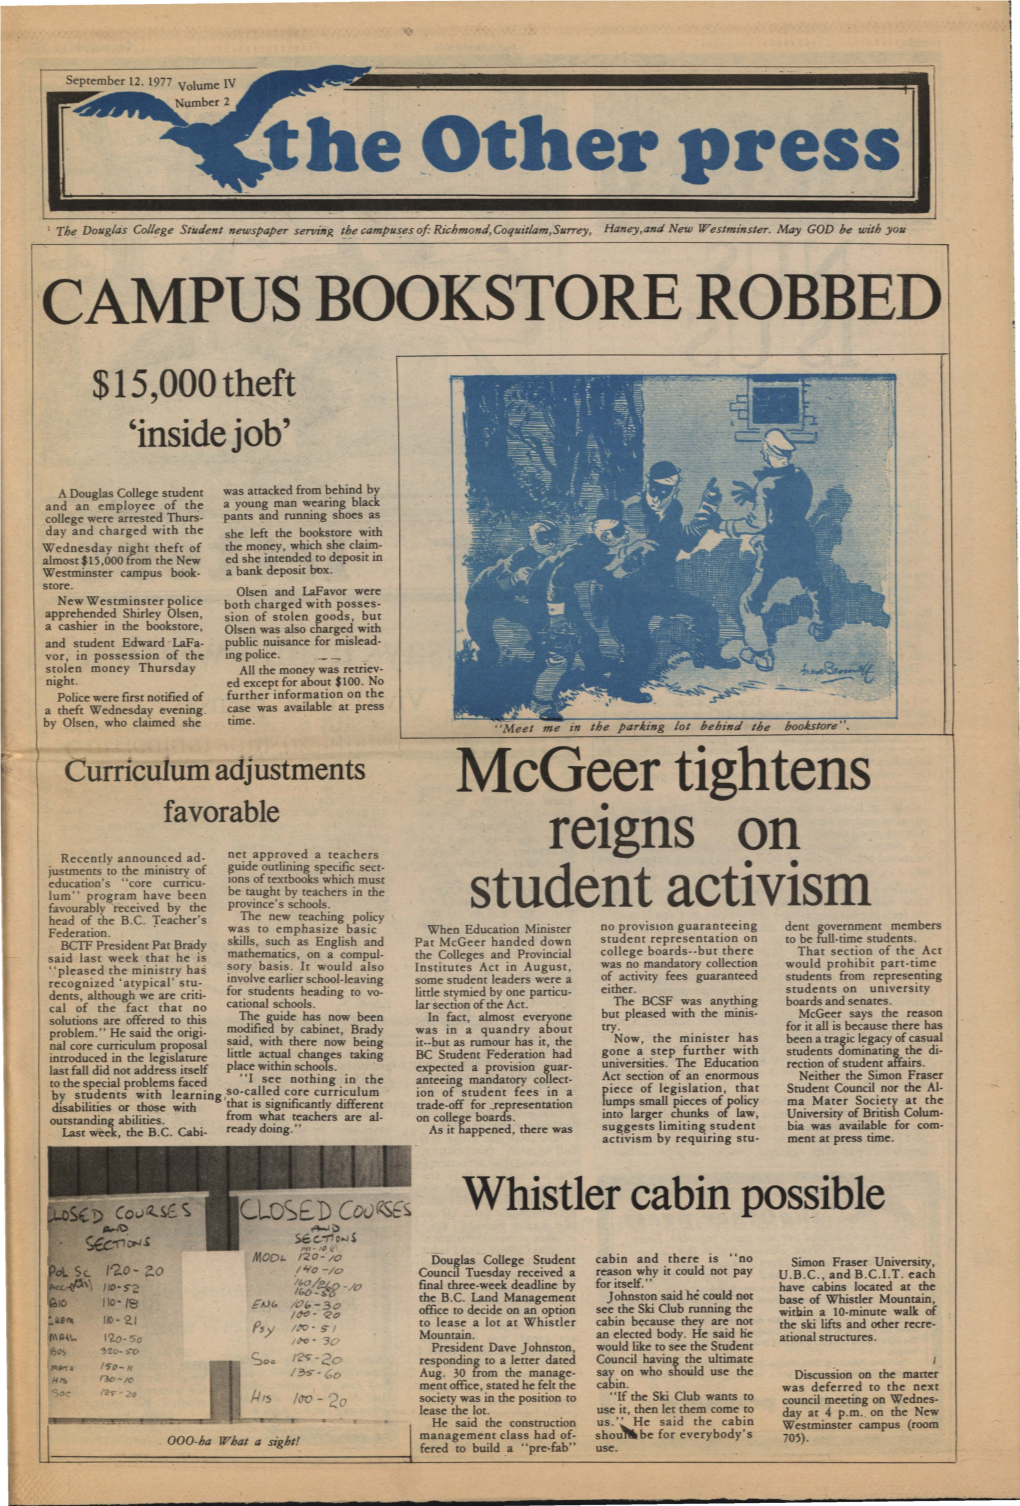 ·CAMPUS BOOKSTORE ROBBED Mcgeer Tightens Retgns